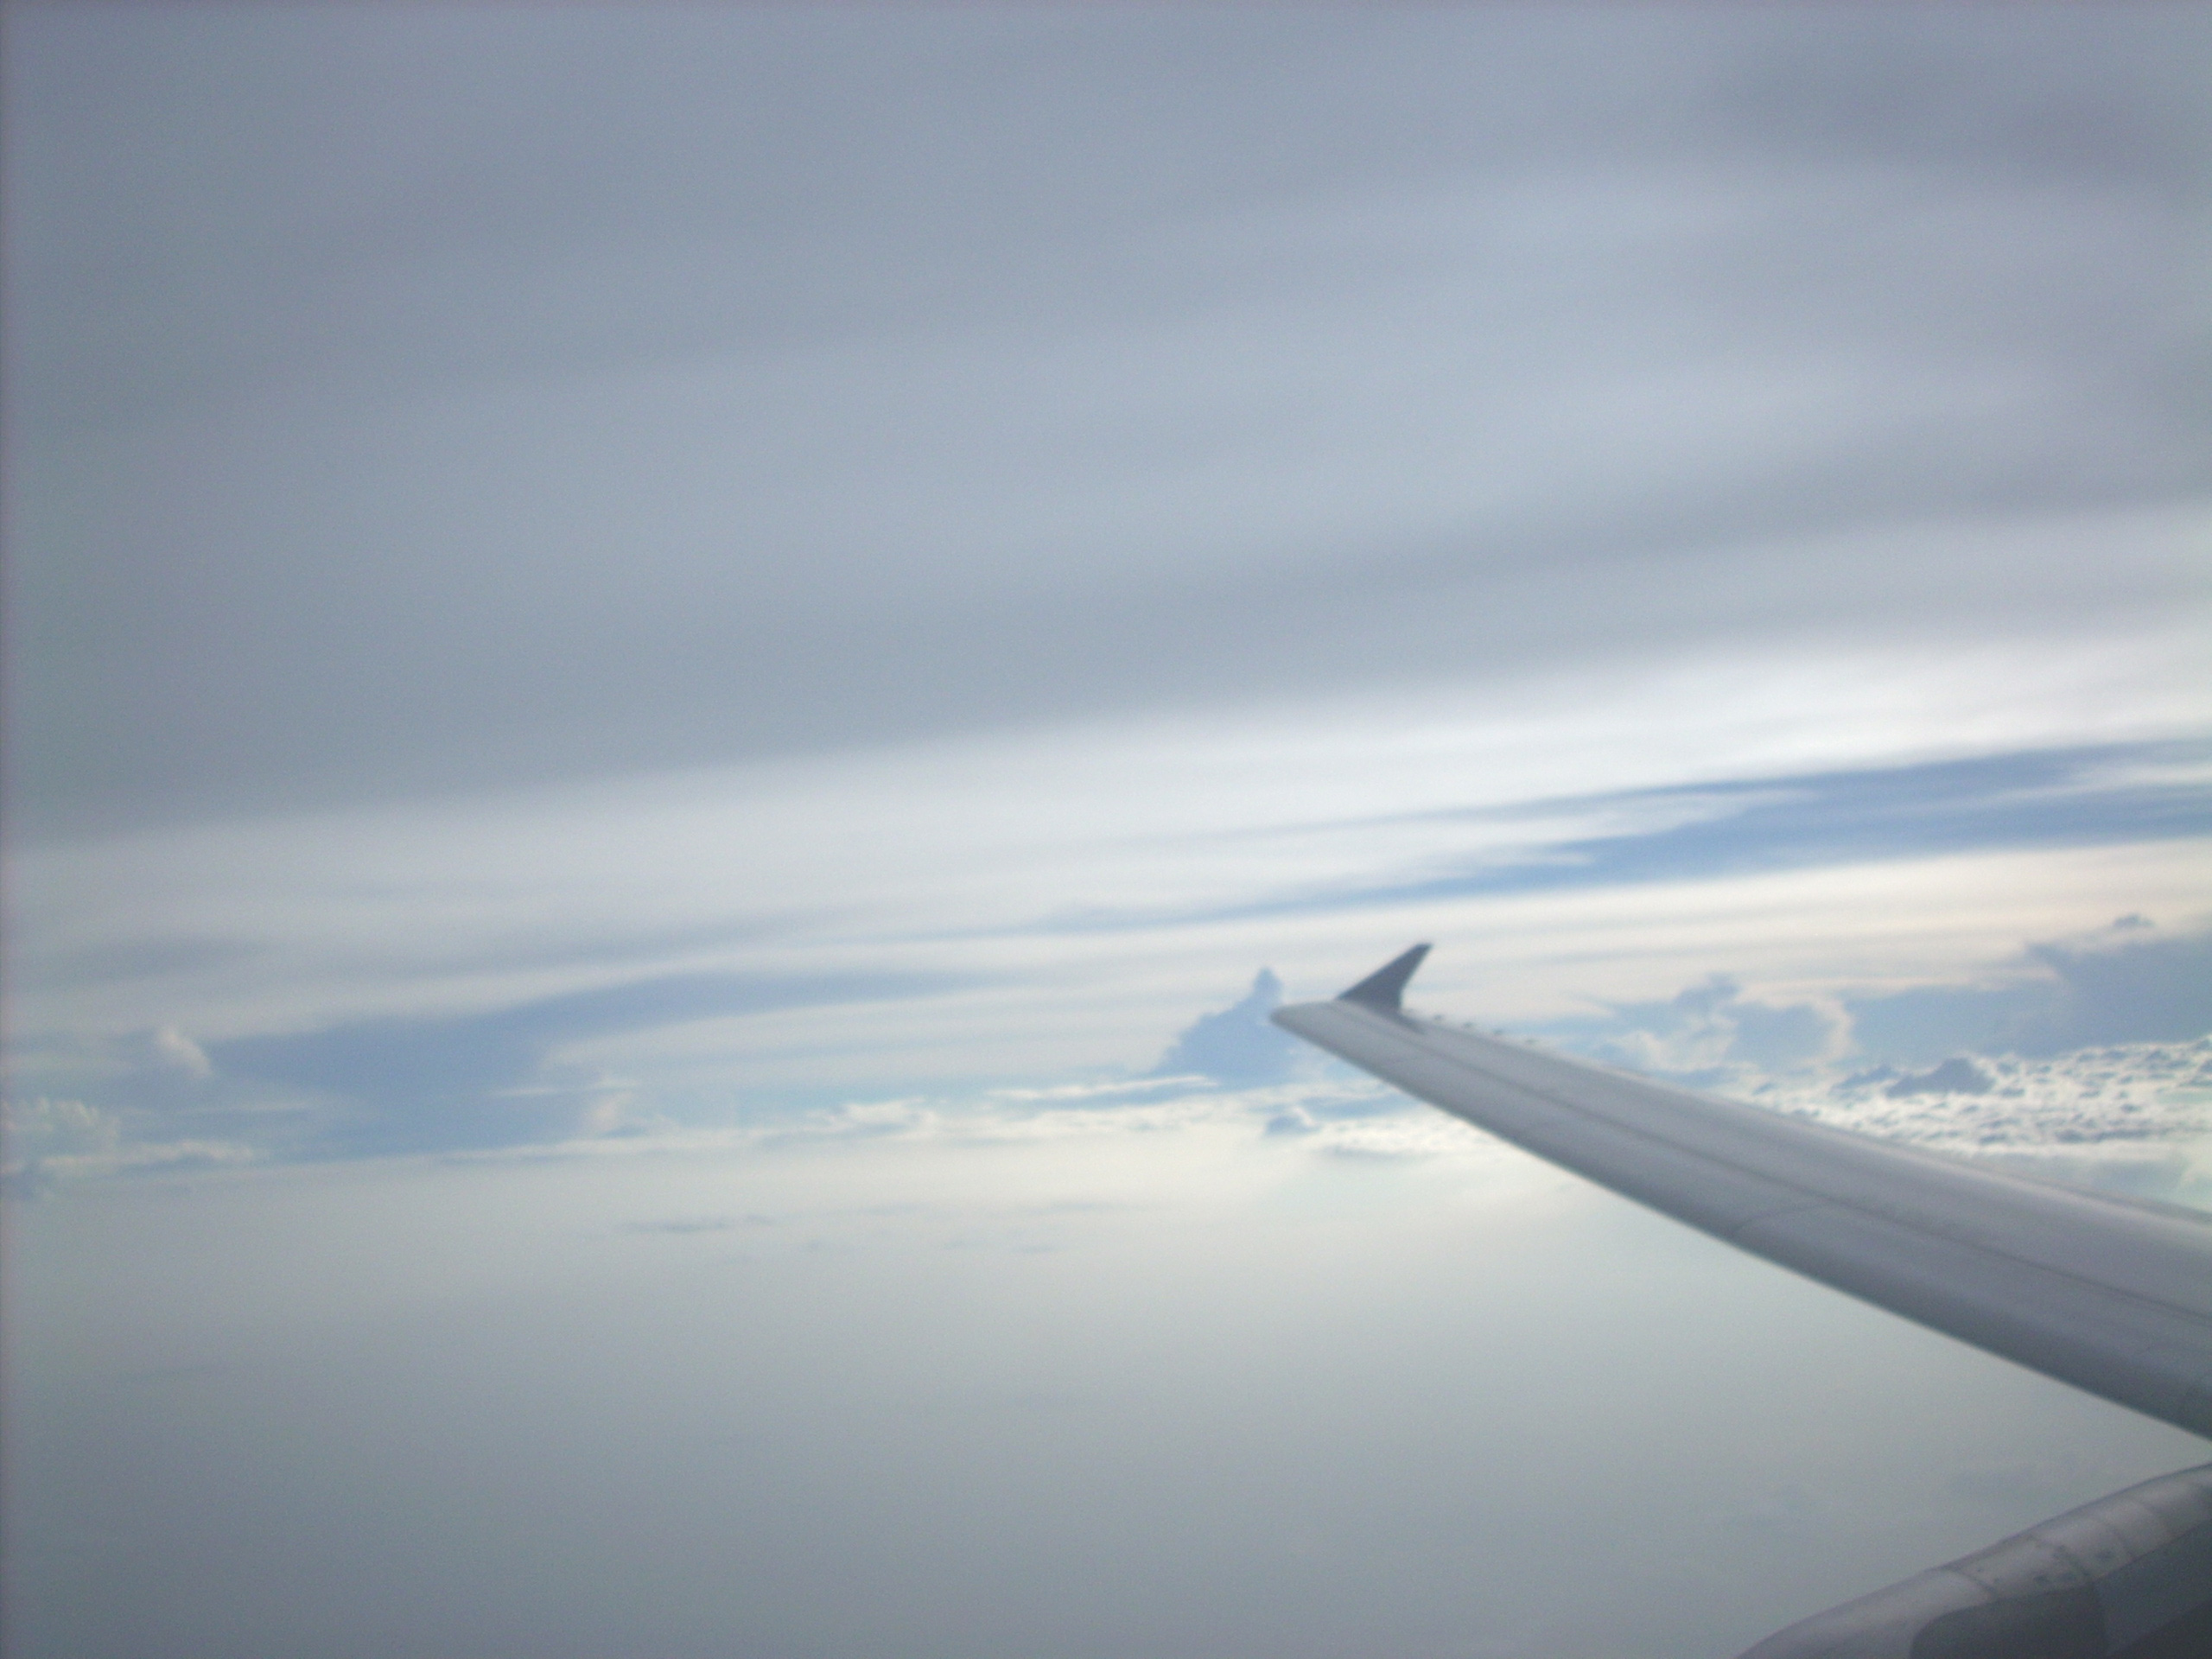 Clouds at 35,000 Feet